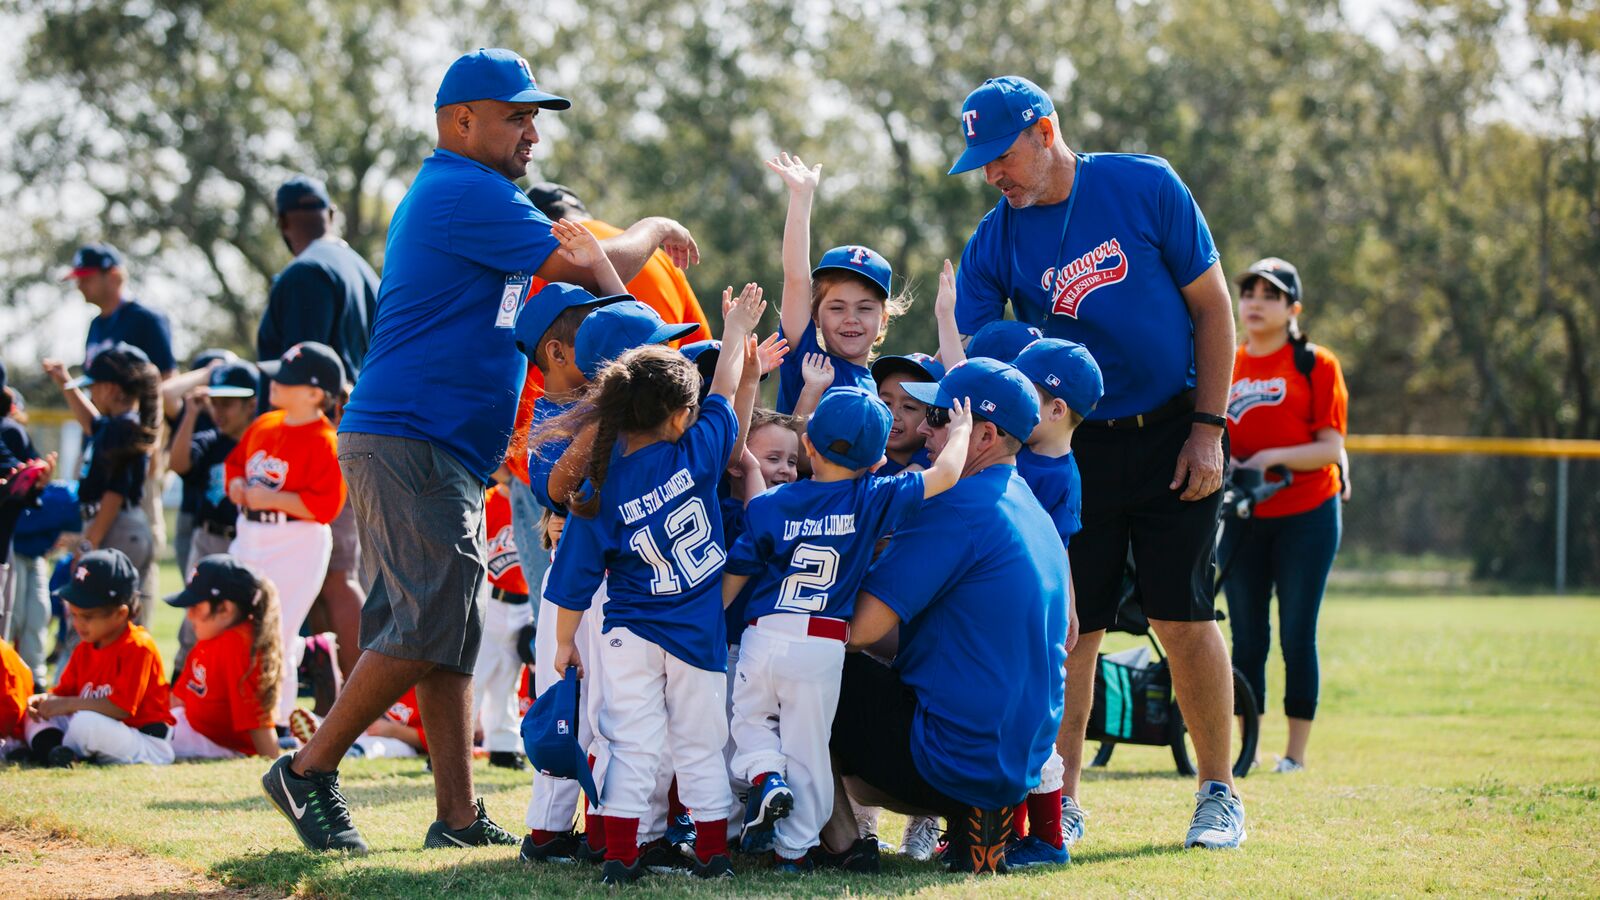 Children kick off the Little League season in Ingleside after the ballpark was repaired.